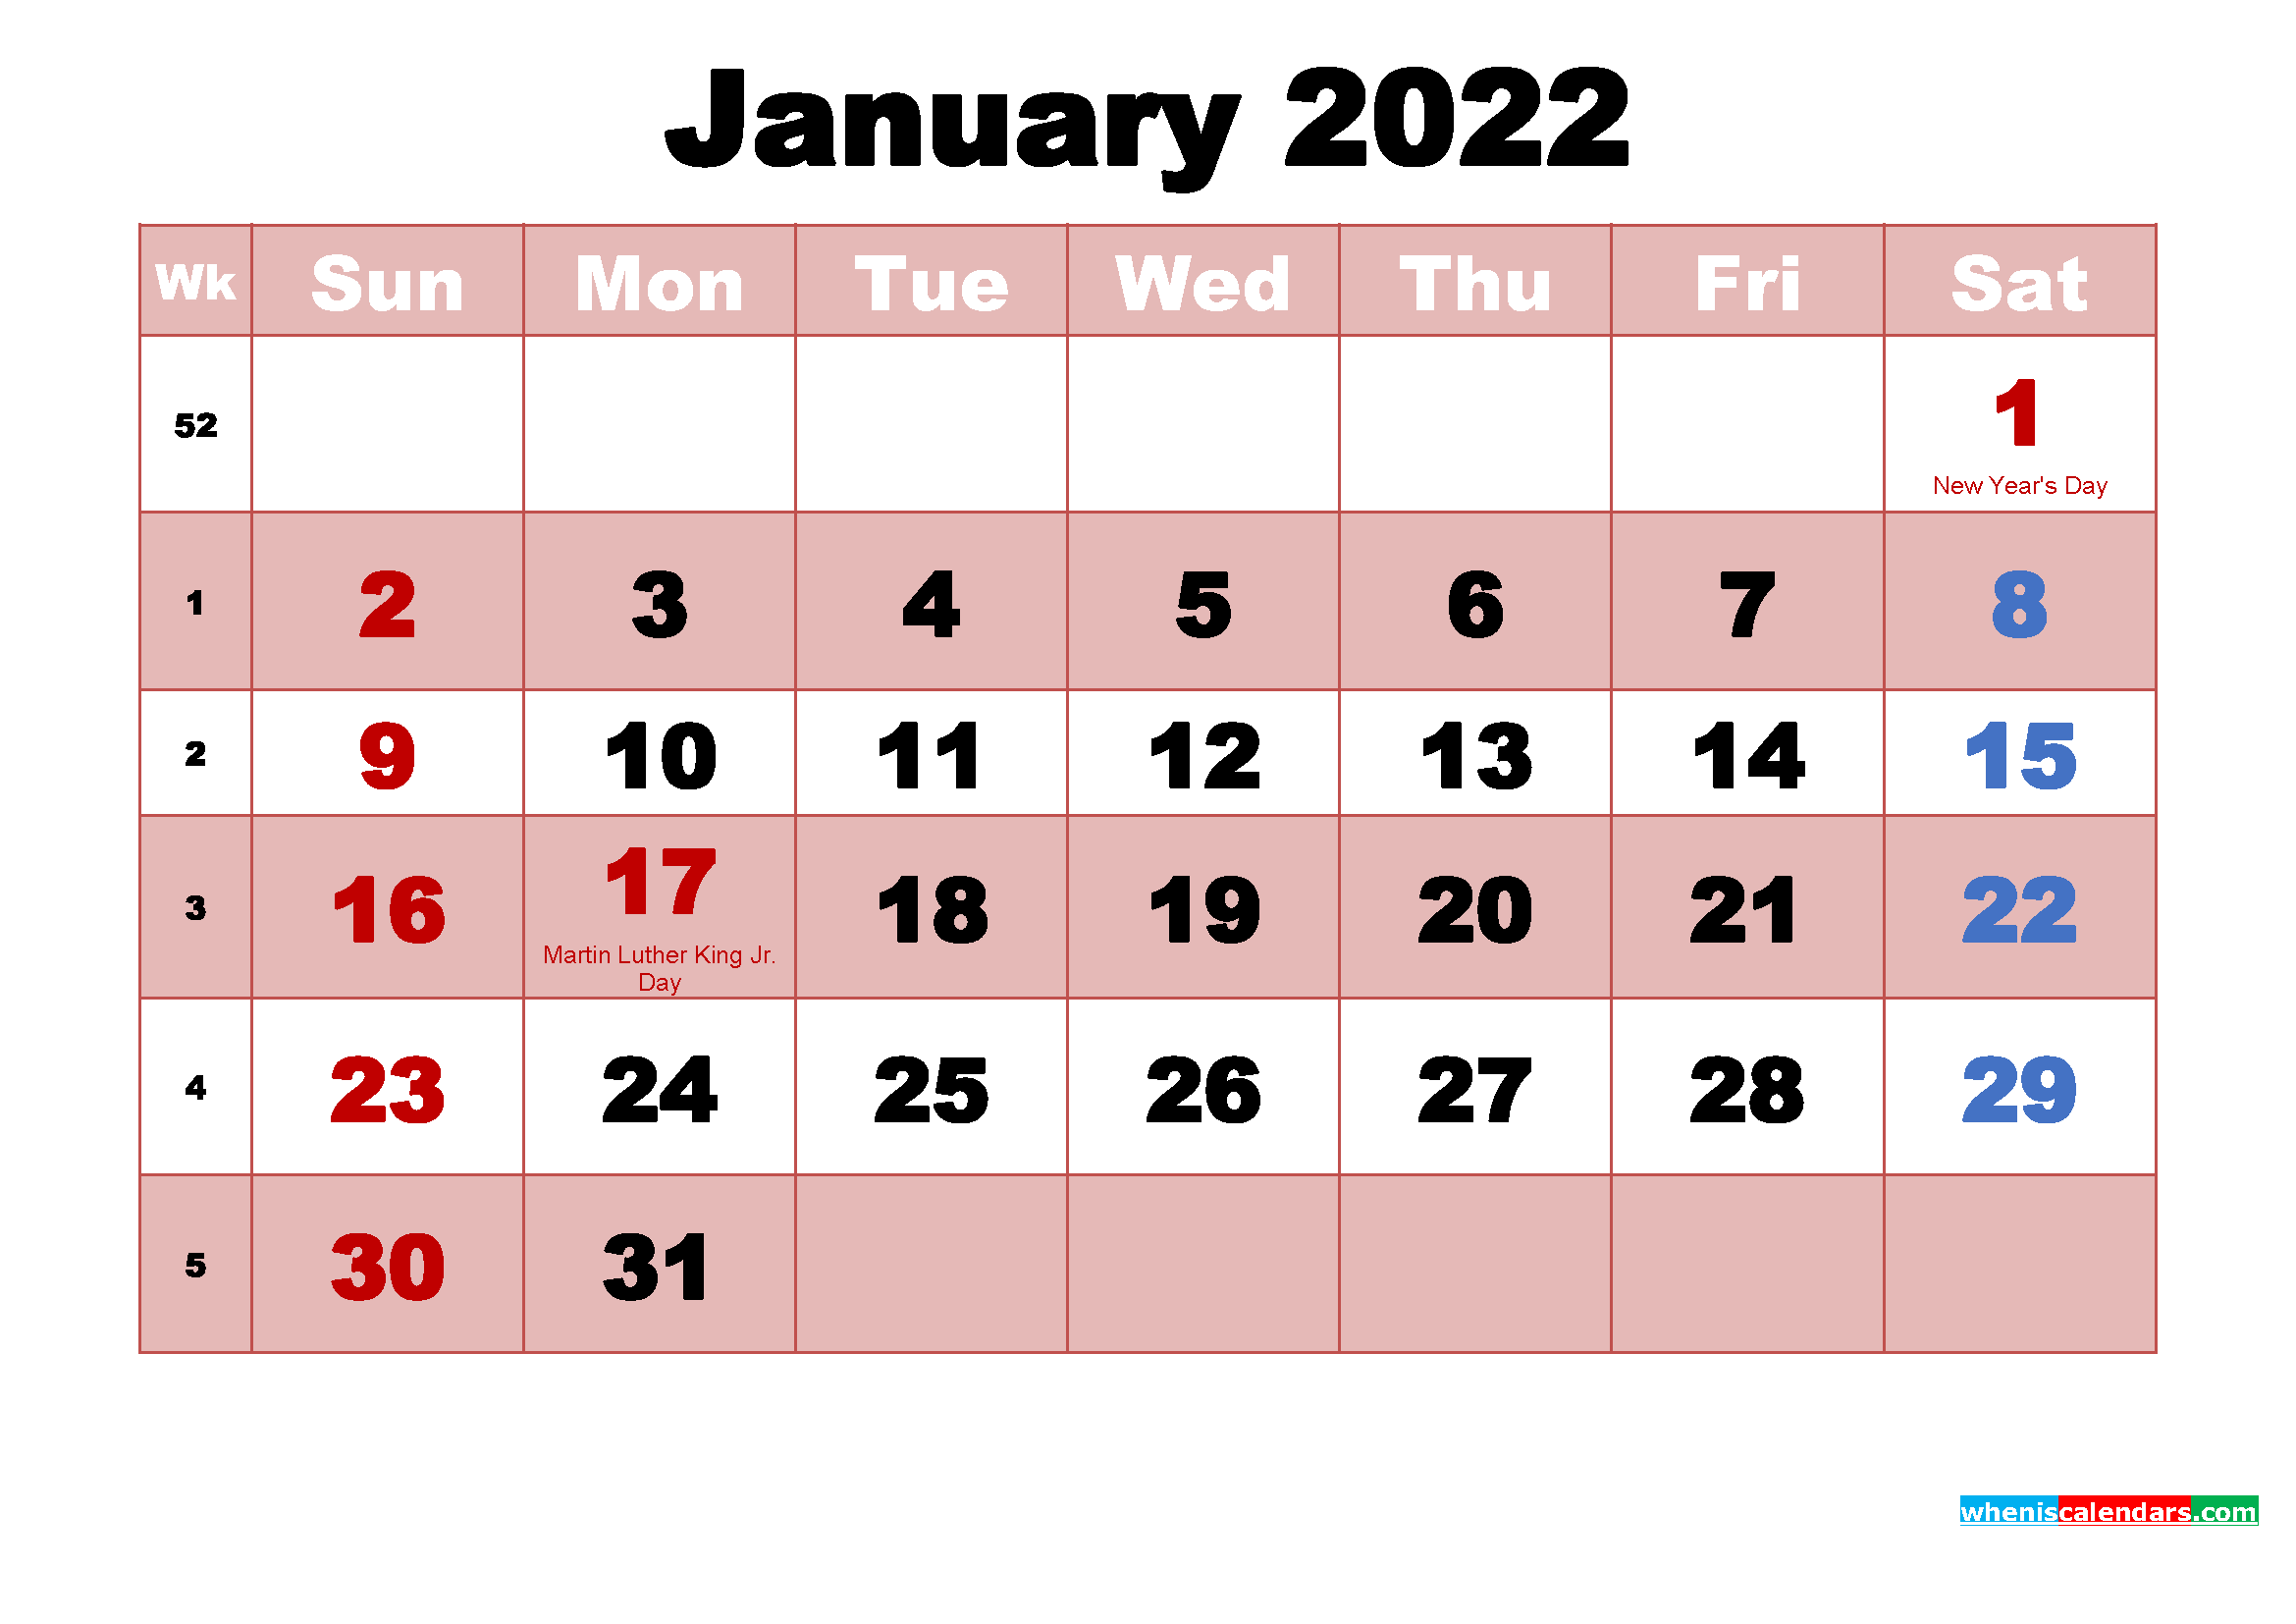 January 2022 Printable Monthly Calendar with Holidays